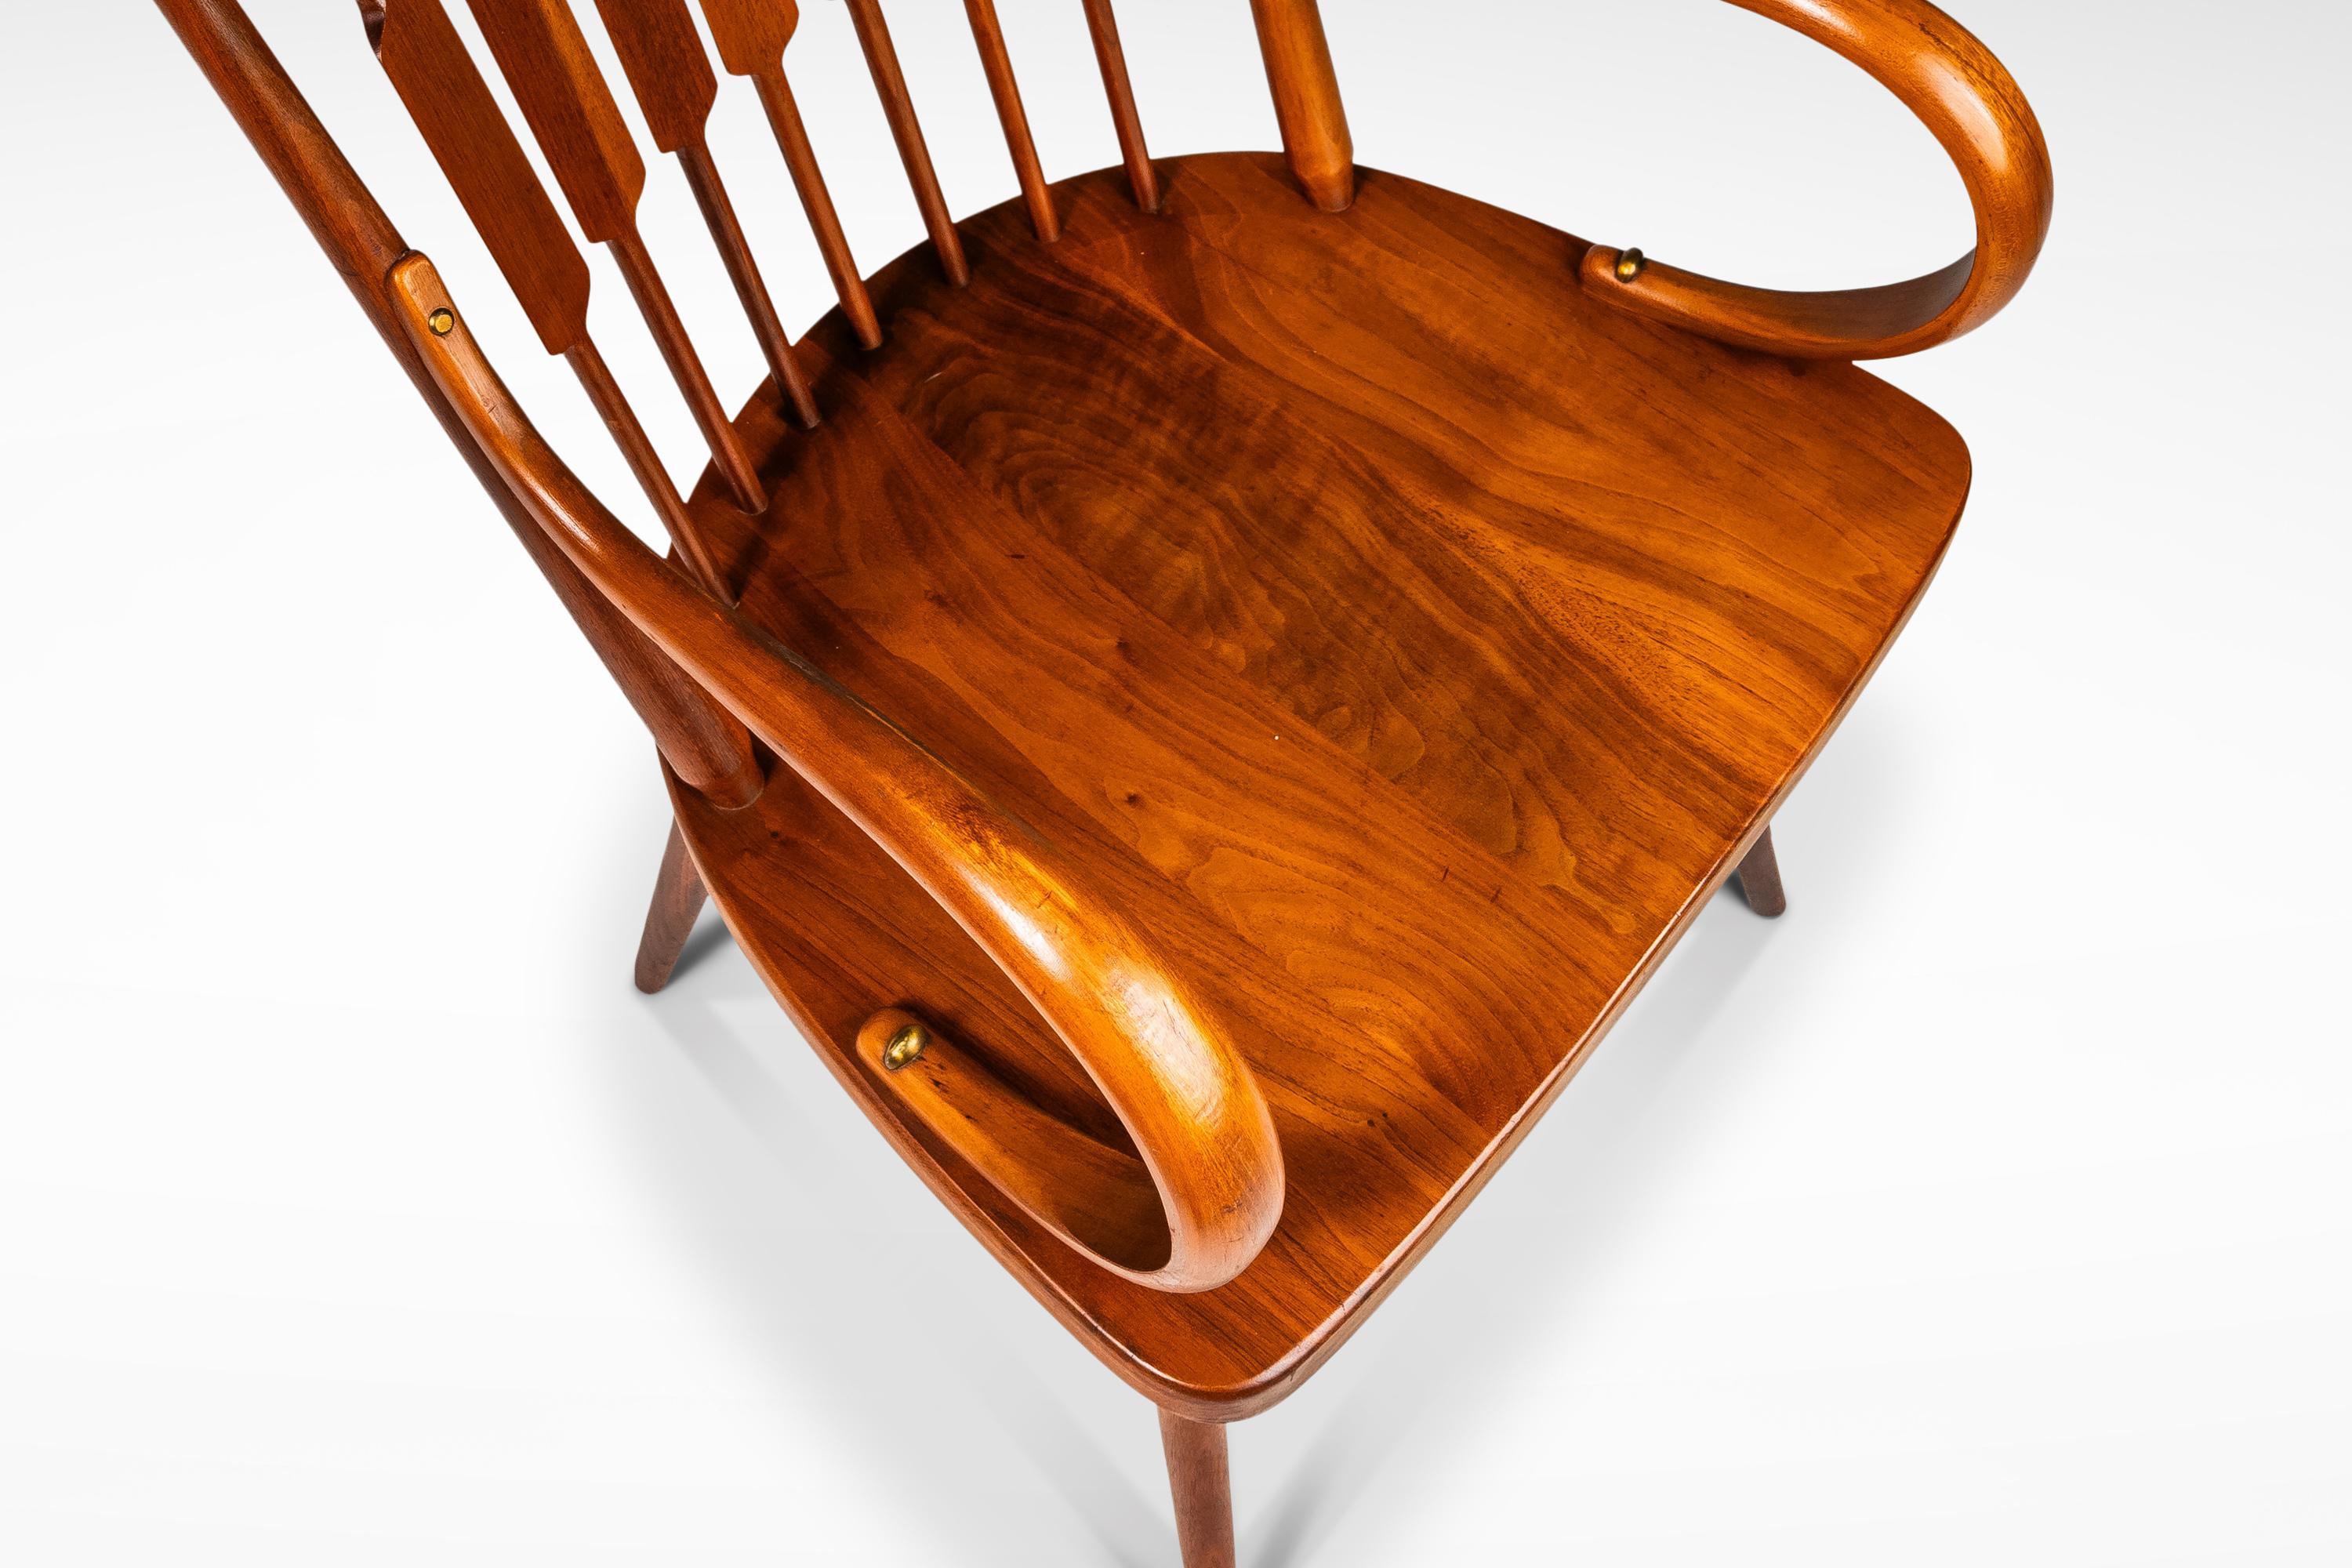 Set of 2 Windsor Chairs in Solid Walnut by Kipp Stewart for Drexel, USA, c. 1960 For Sale 5